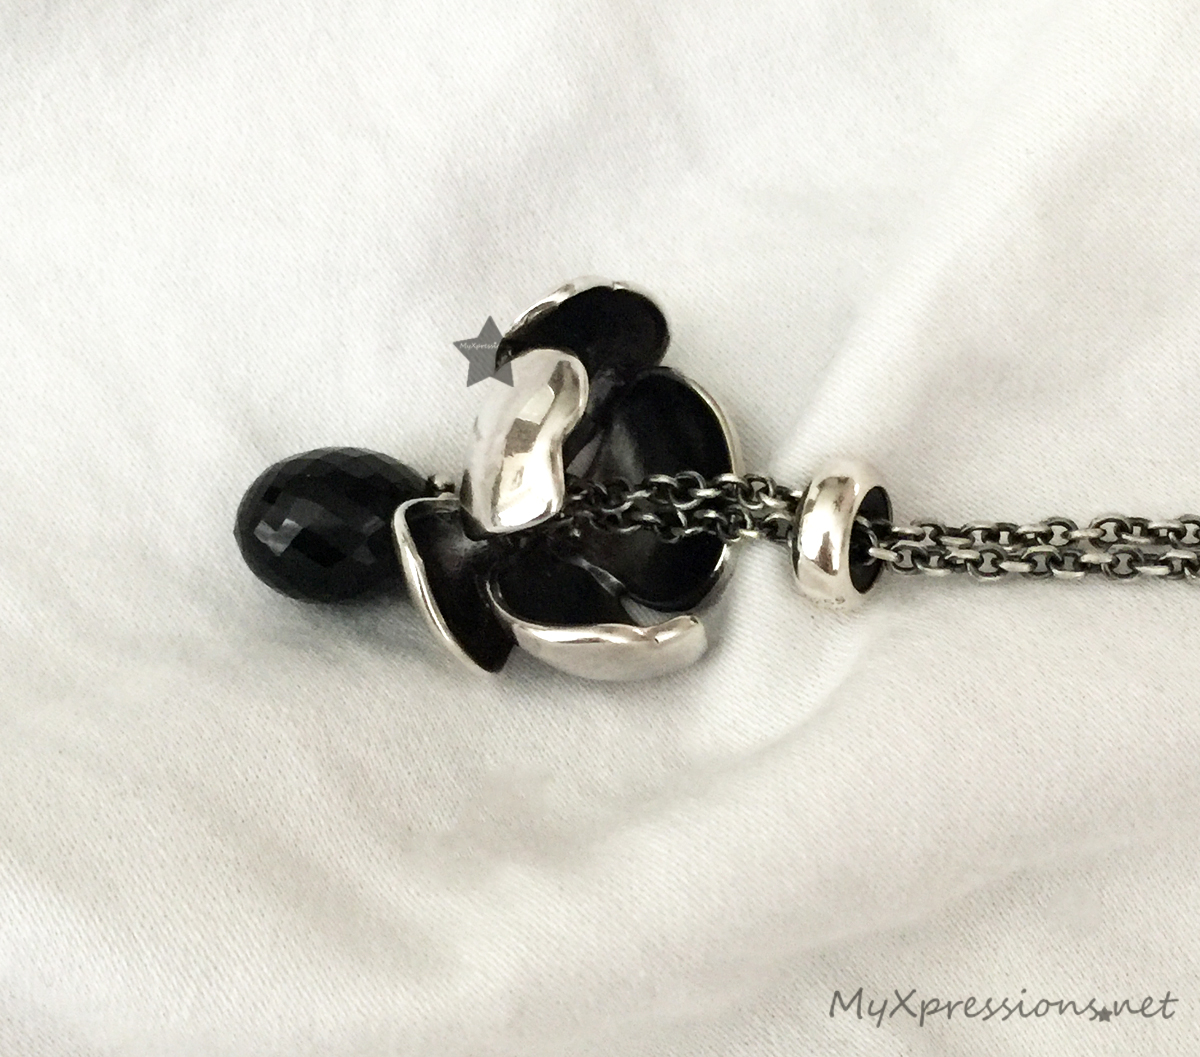 Latest Acquisition: Trollbeads Shadow Flower Pendant – My Xpressions